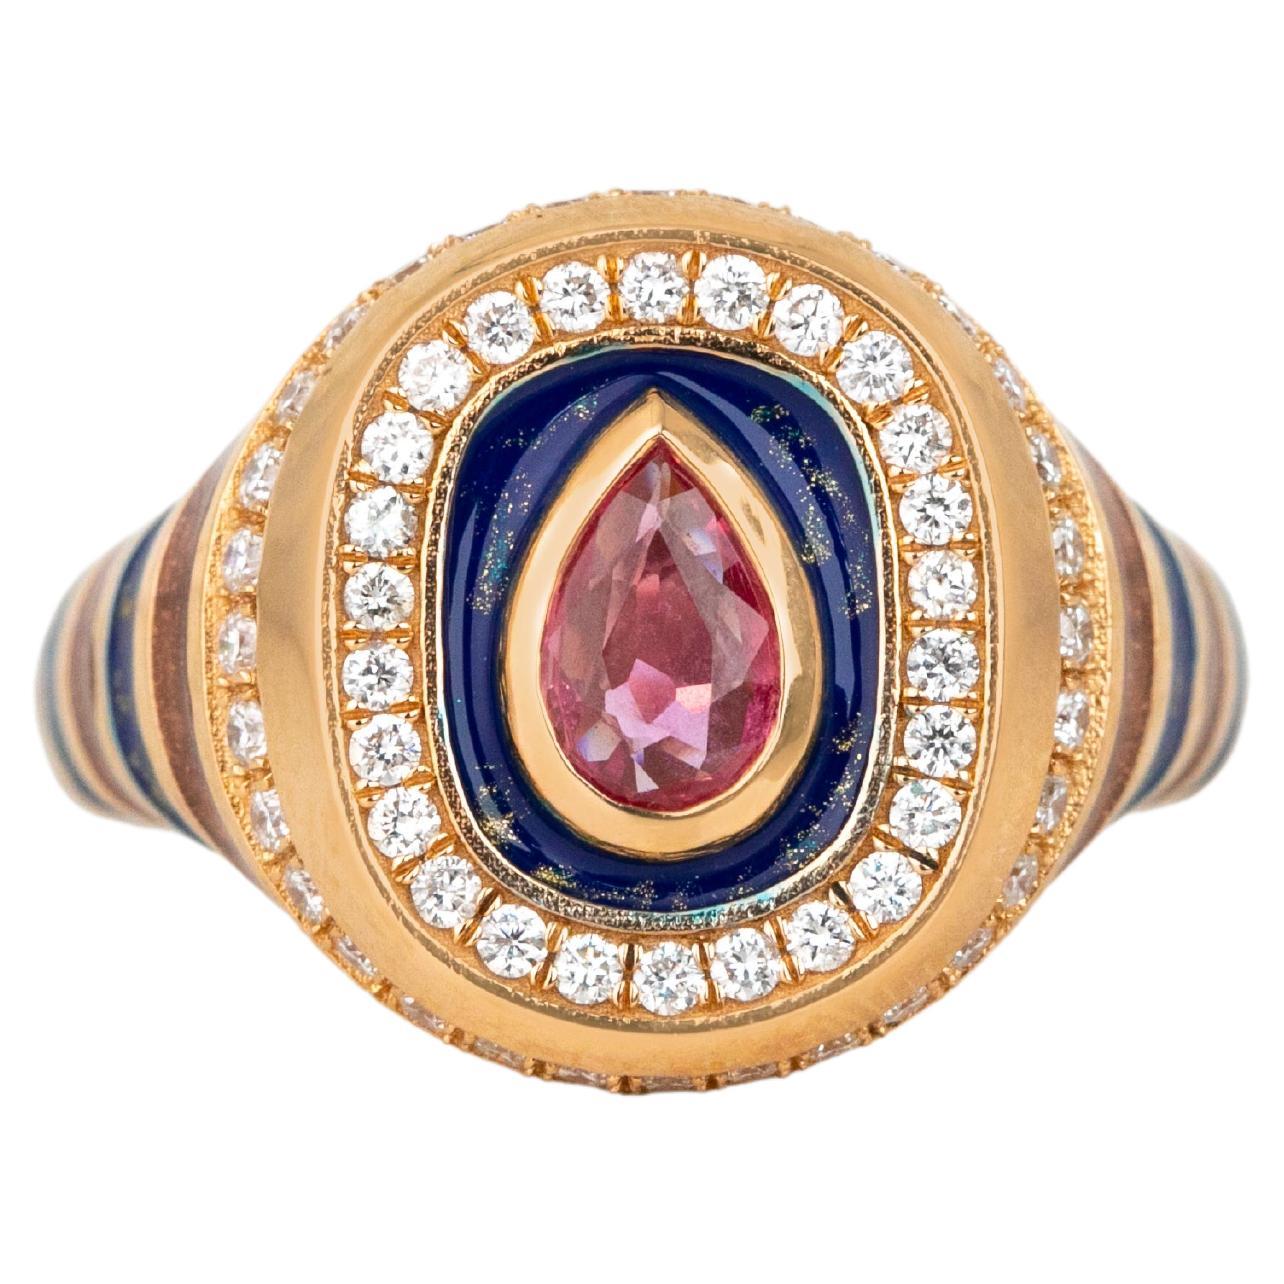 For Sale:  14K Gold 0.50 Ct Tourmaline & Diamond Enameled Cocktail Ring, Chevalier Ring